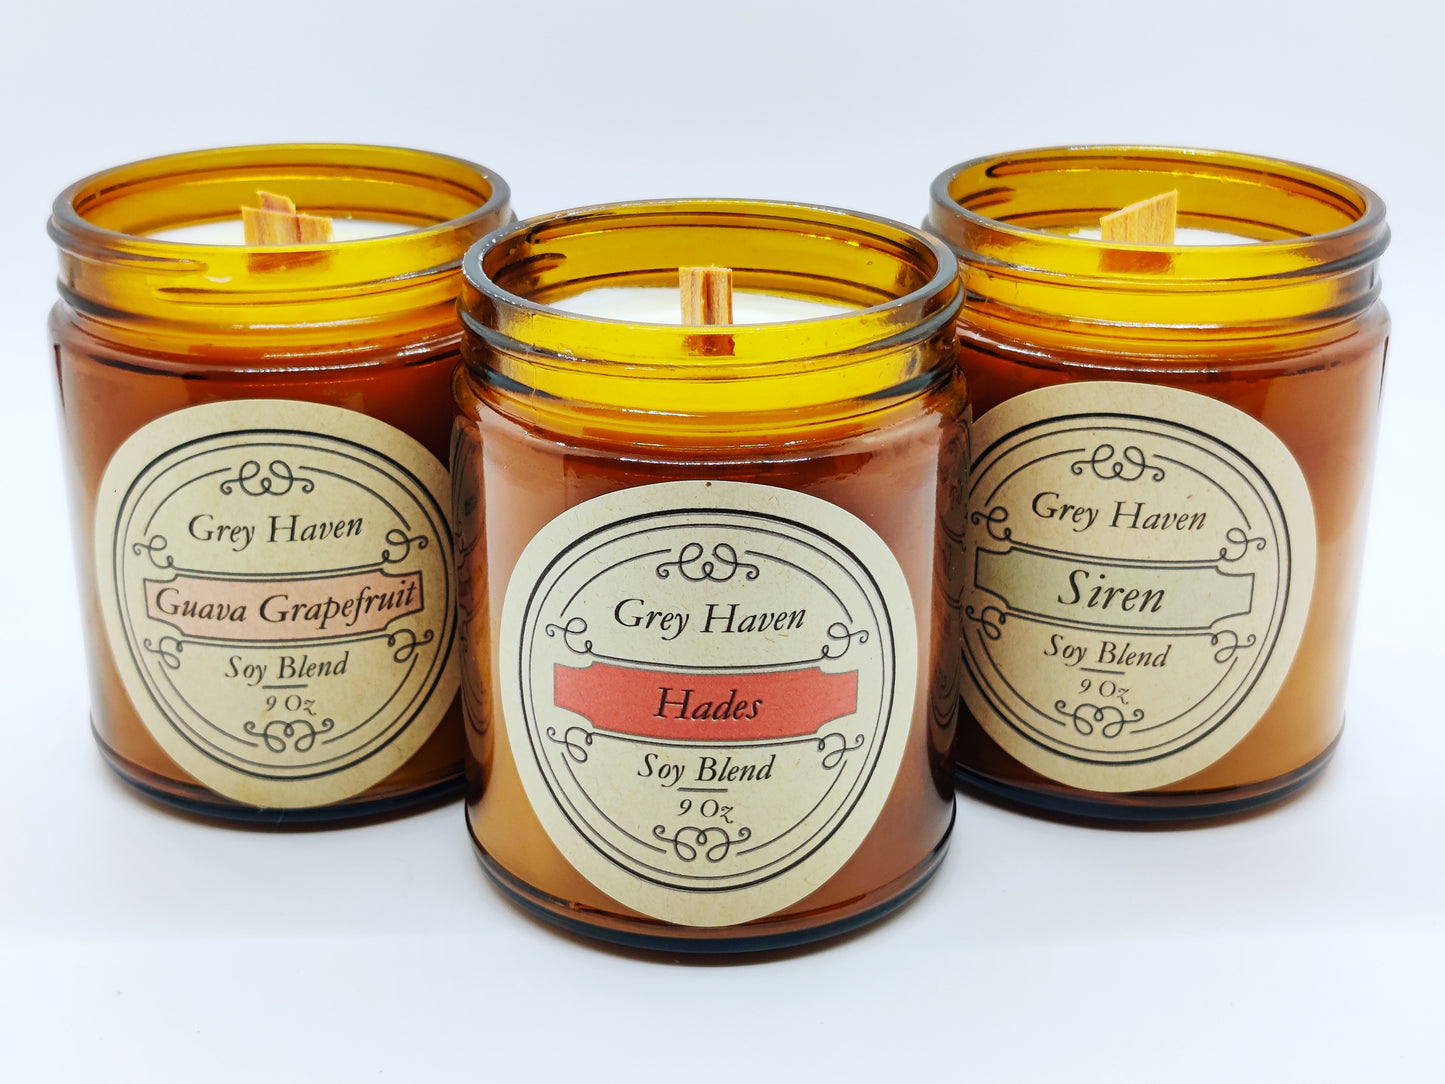 Soy Blend Candles